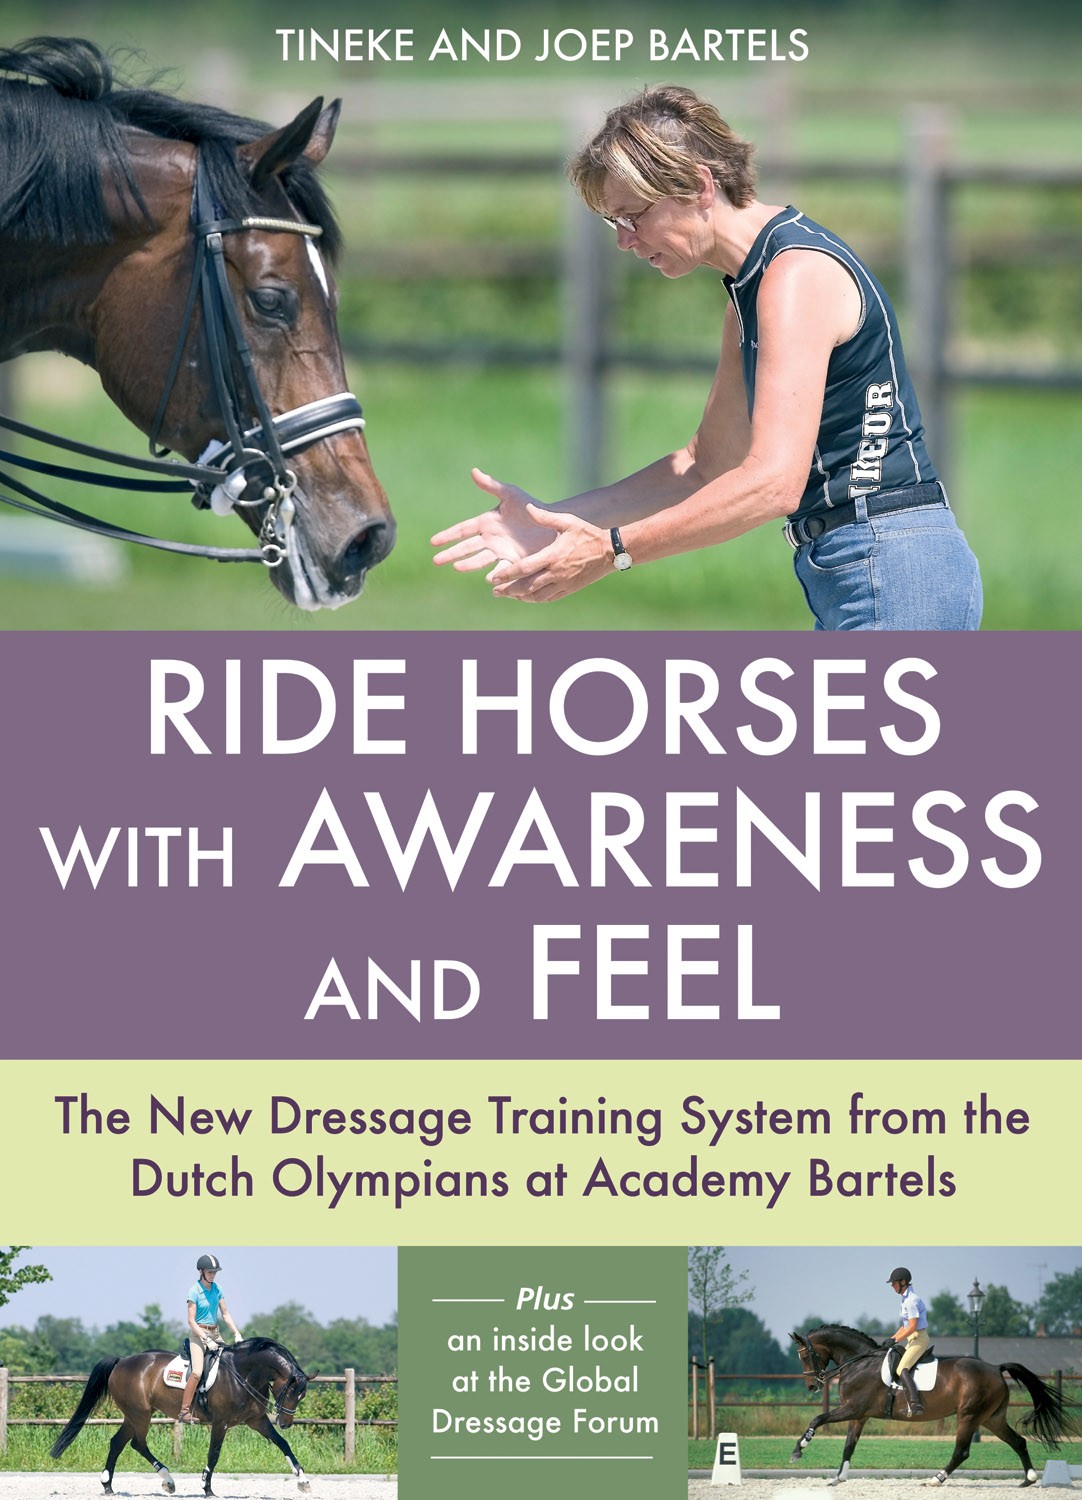 Ride Horses with Awareness and Feel by Tineke and Joep Bartels from trot-online